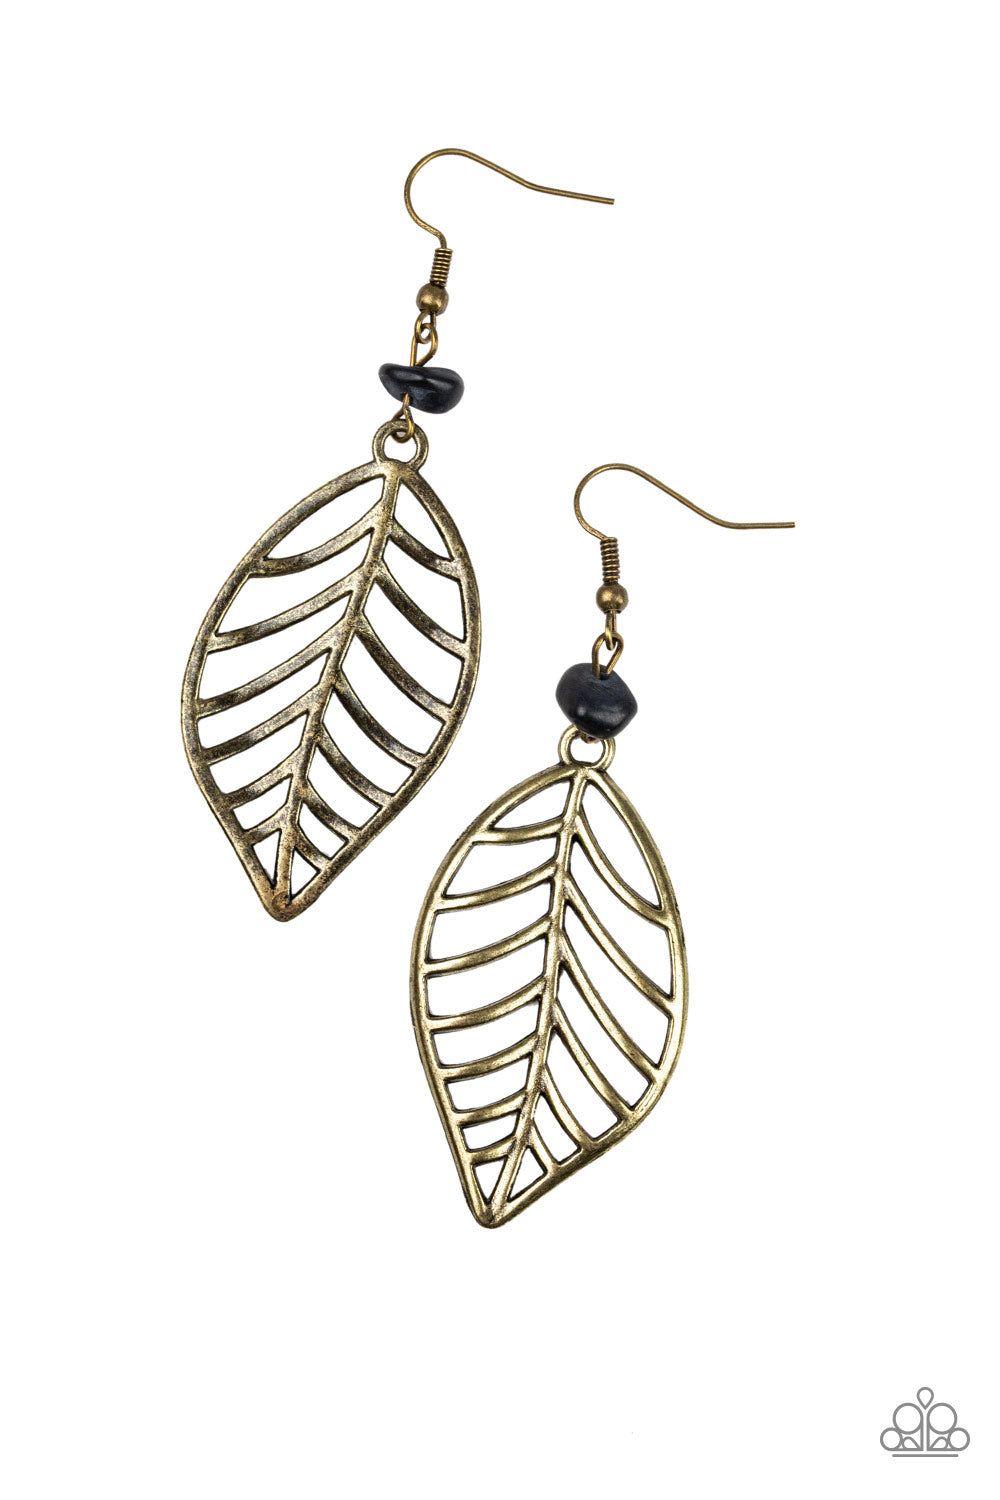 BOUGH Out - Brass Leaf and Black Stone Earrings - Paparazzi Accessories